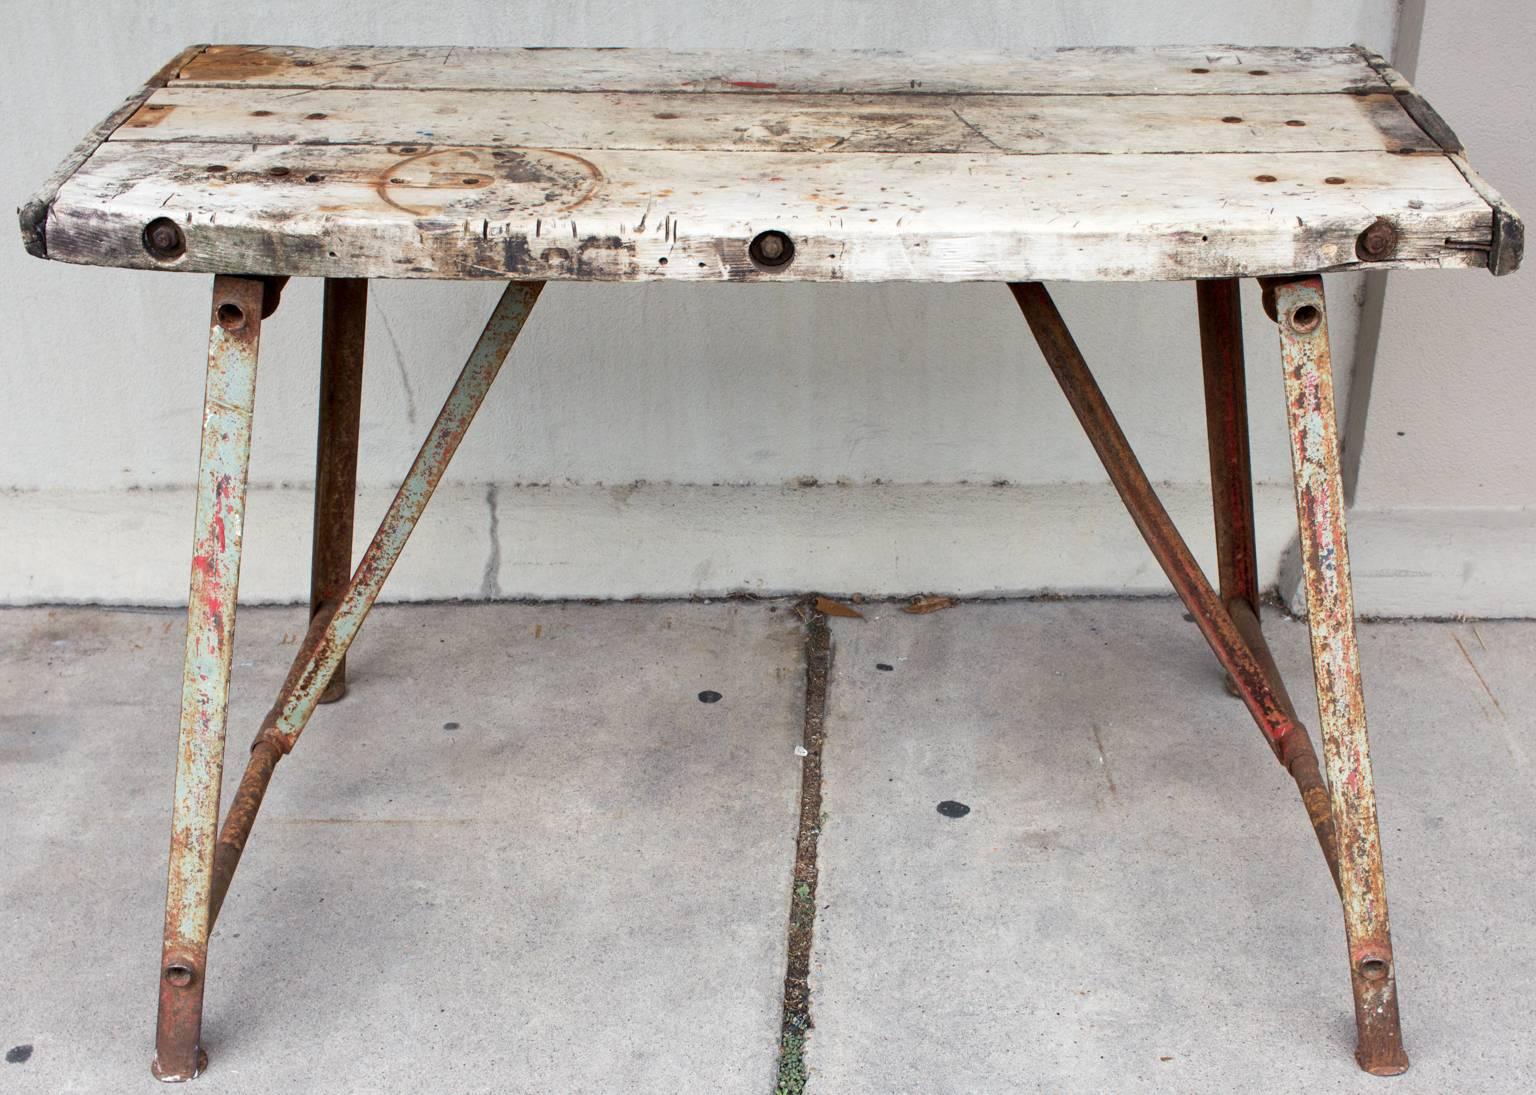 Discovered during our recent time in France, we really fell for a pairing of distressed work tables that were used in a garden which we think would be lovely used indoors or out with large-scale mirrors or art hung above. Cleaned and bleached, these